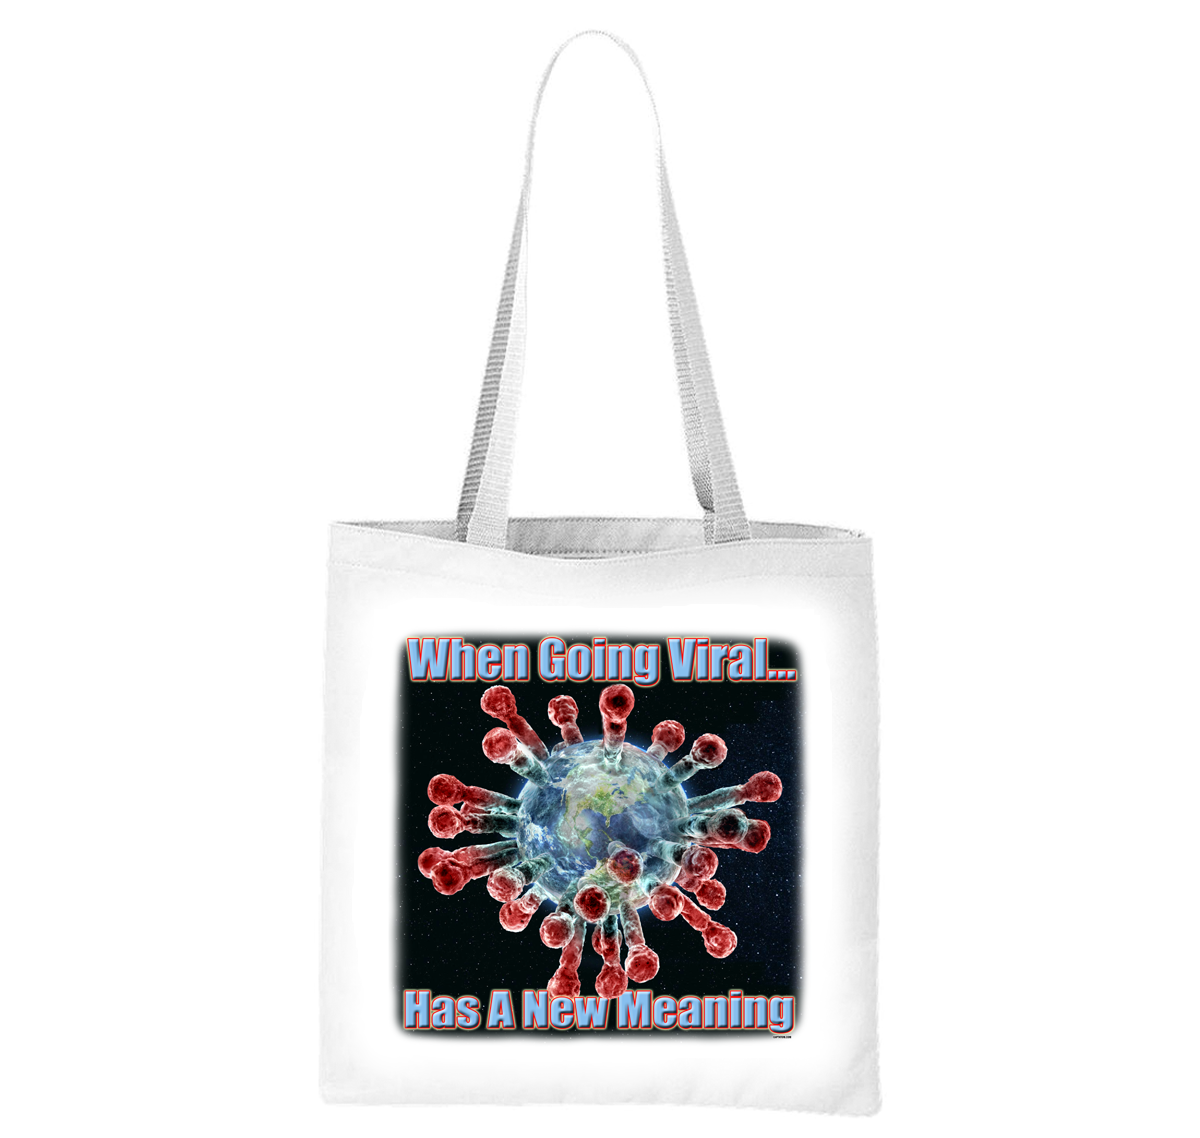 When Going Viral Has A New Meaning- Coronavirus Covid-19 Liberty Bag